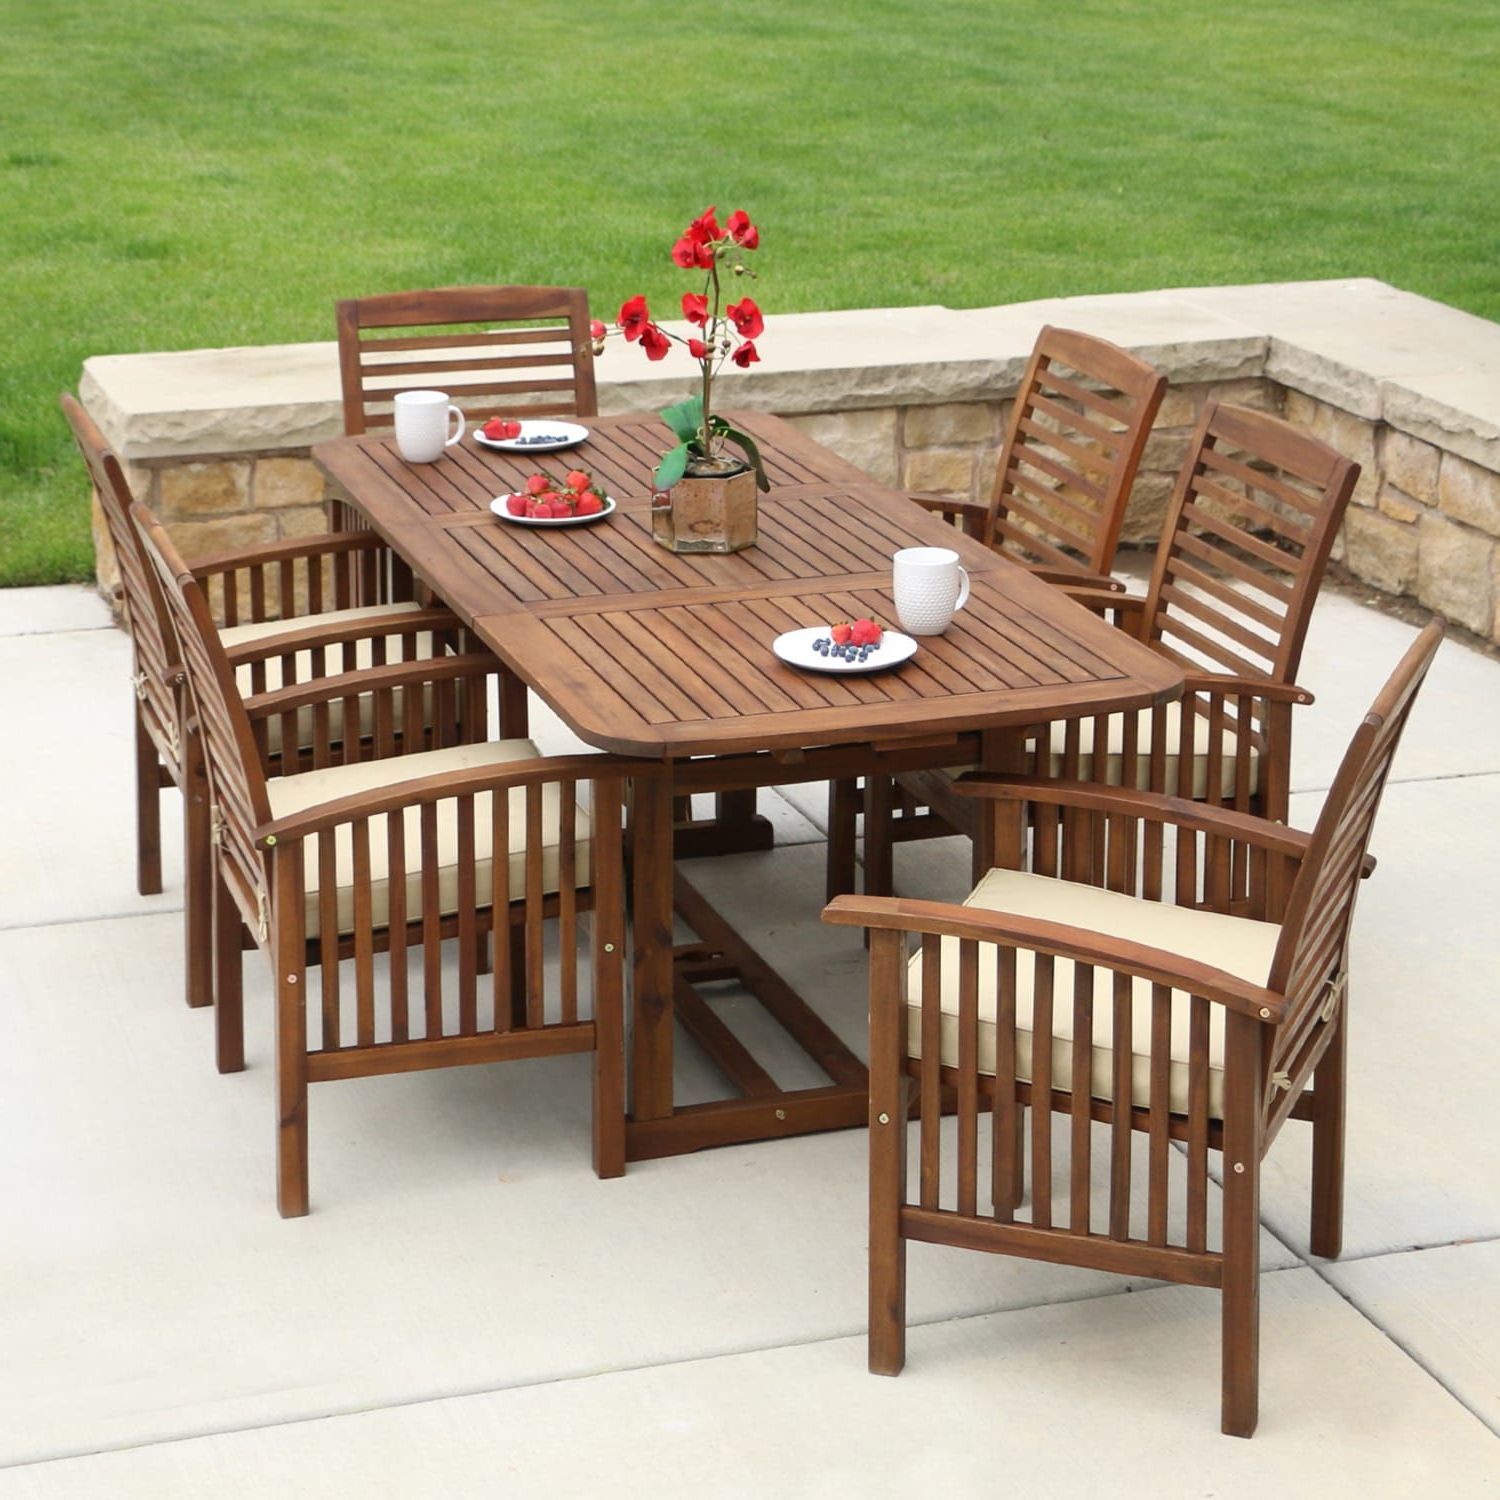 Patio Furniture Sets, Outdoor (View 6 of 15)